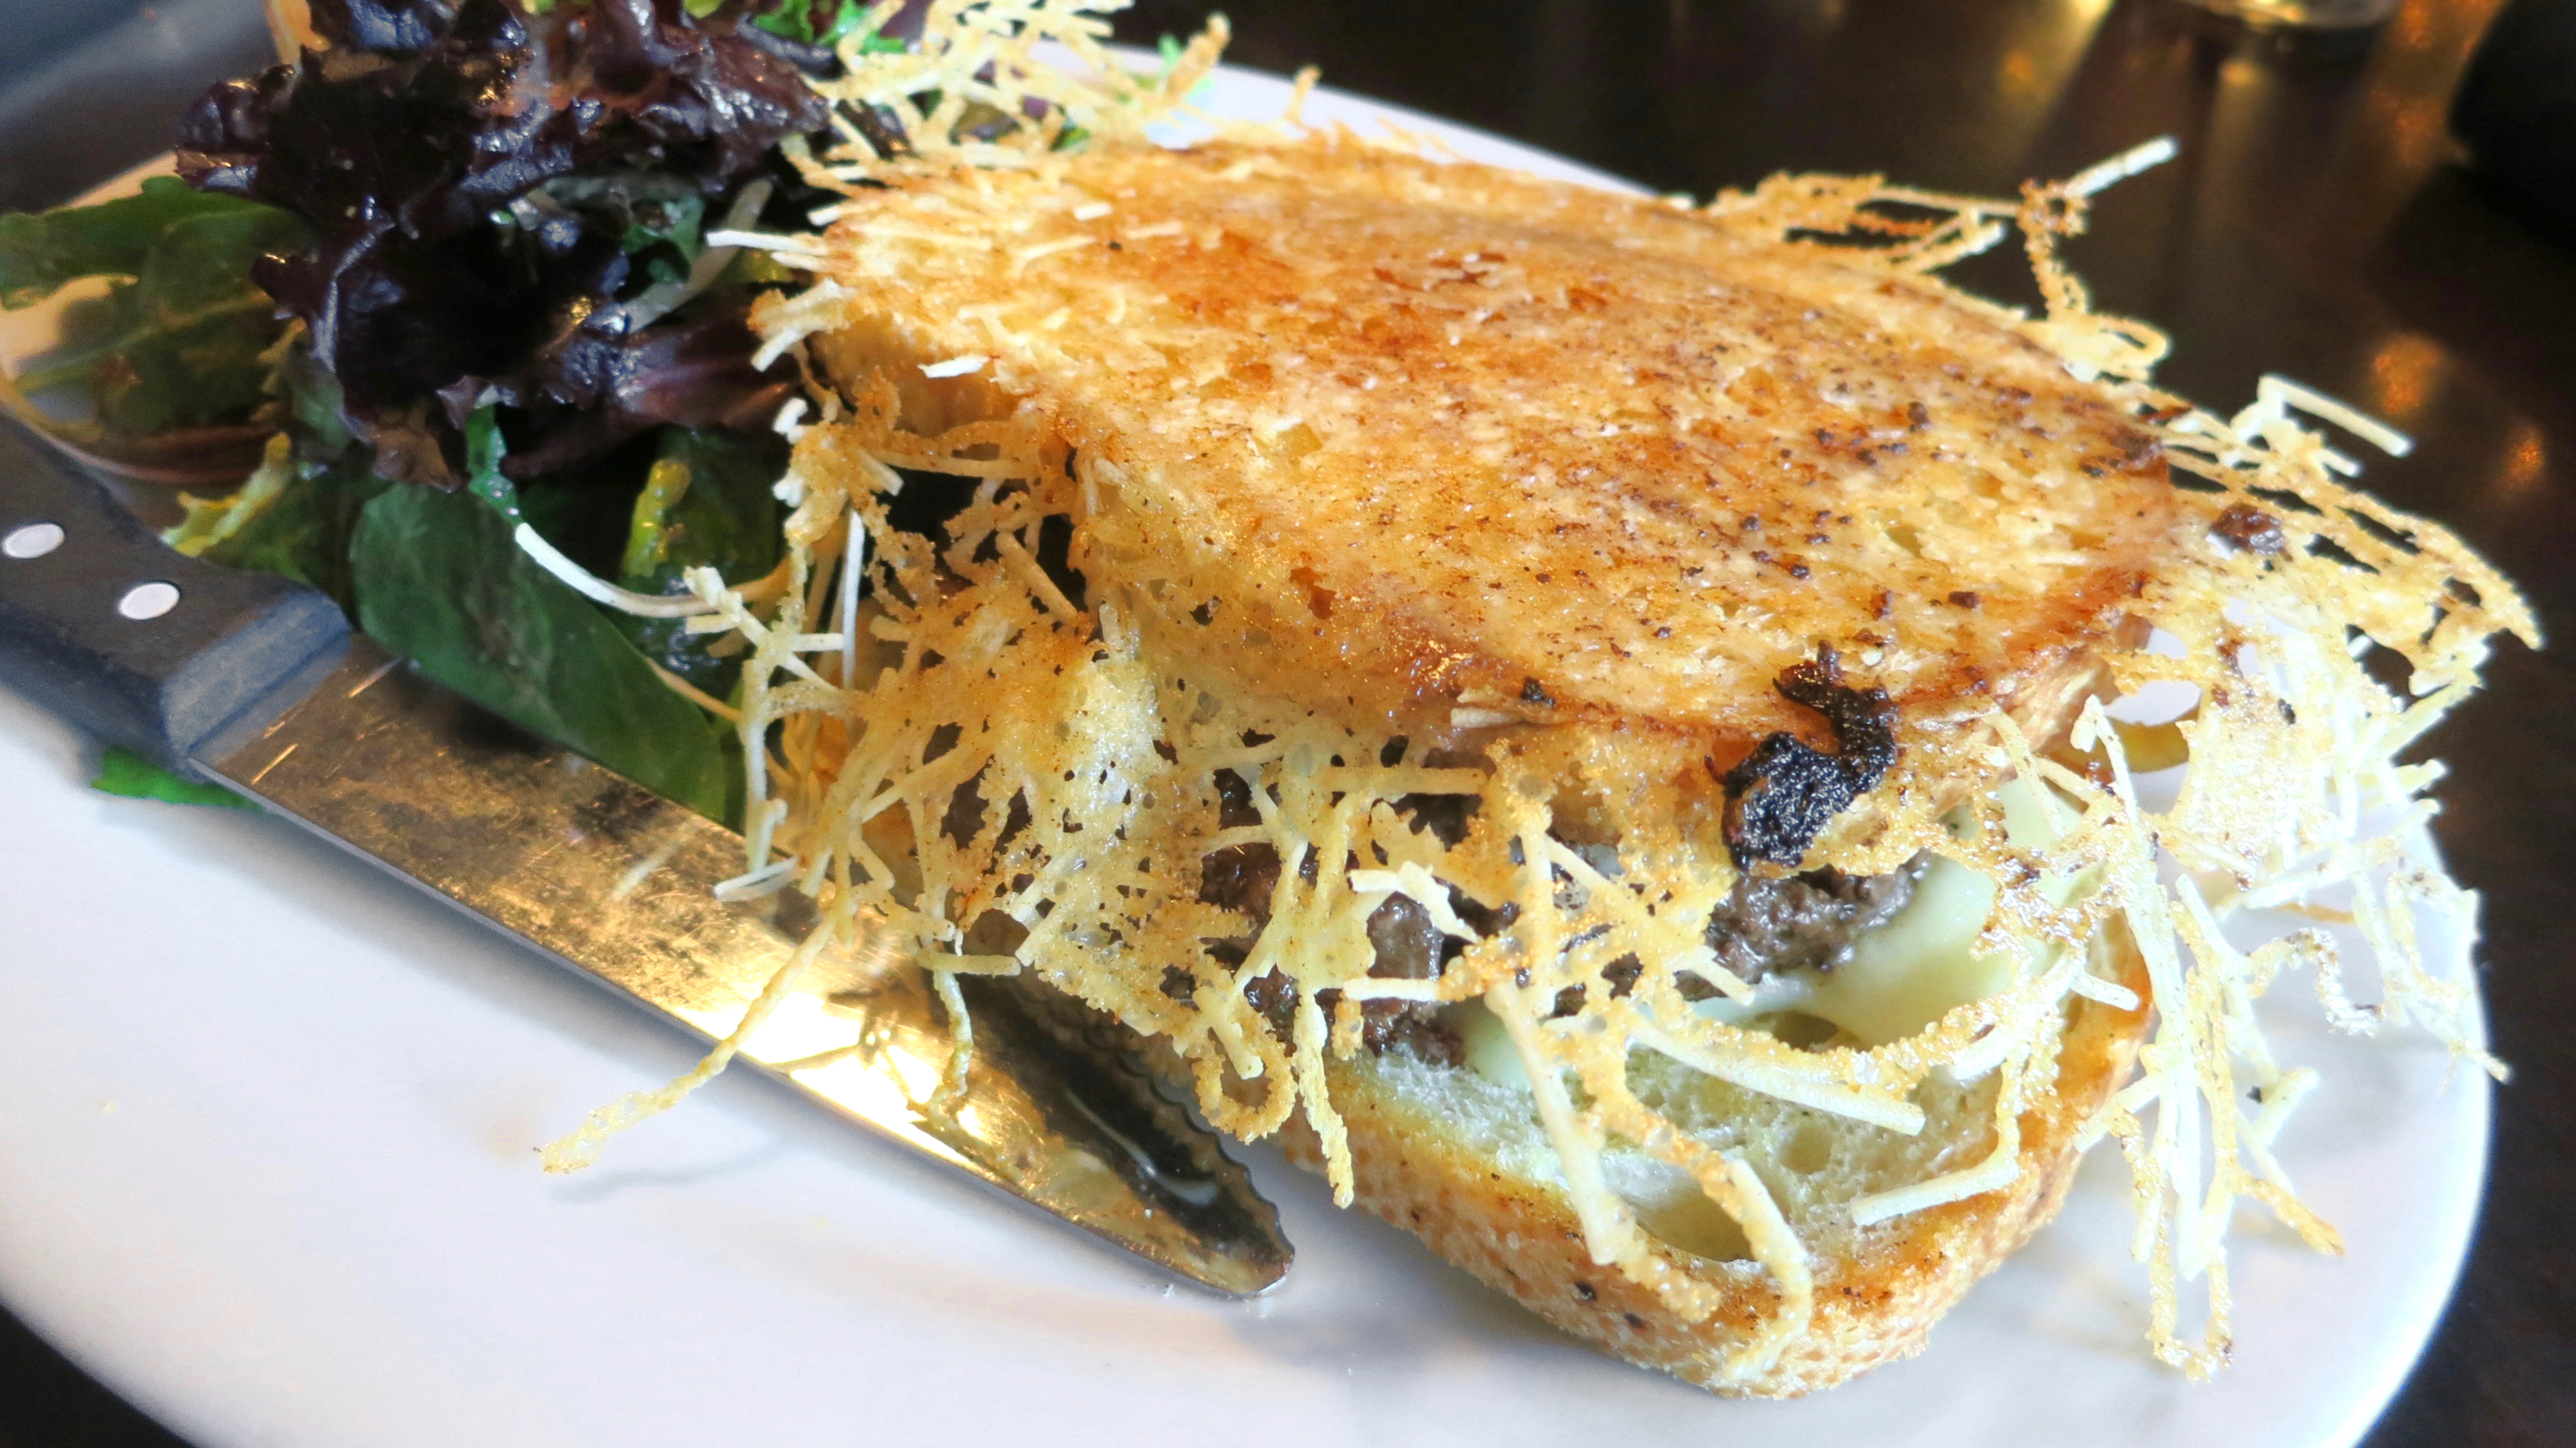 The Peasant Courtyard's Parmesan-encrusted patty melt is a real show stopper.